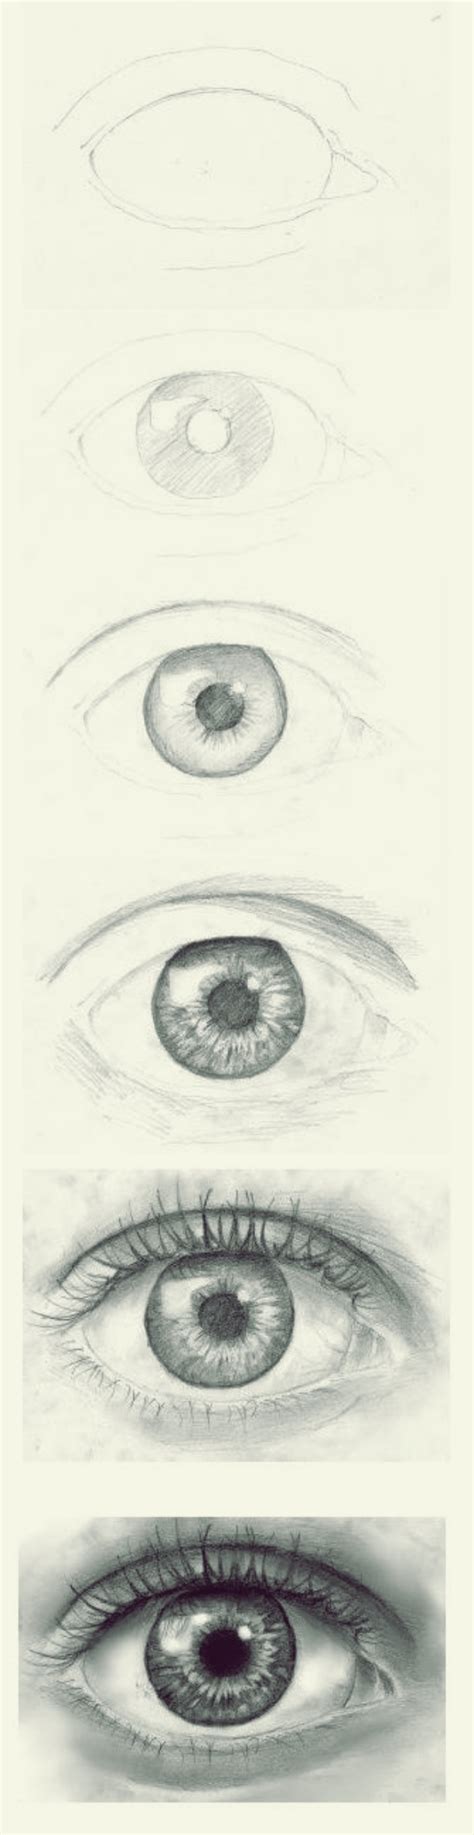 How To Draw Eye Step By Step Beginners Drawings Guide Archziner Lou